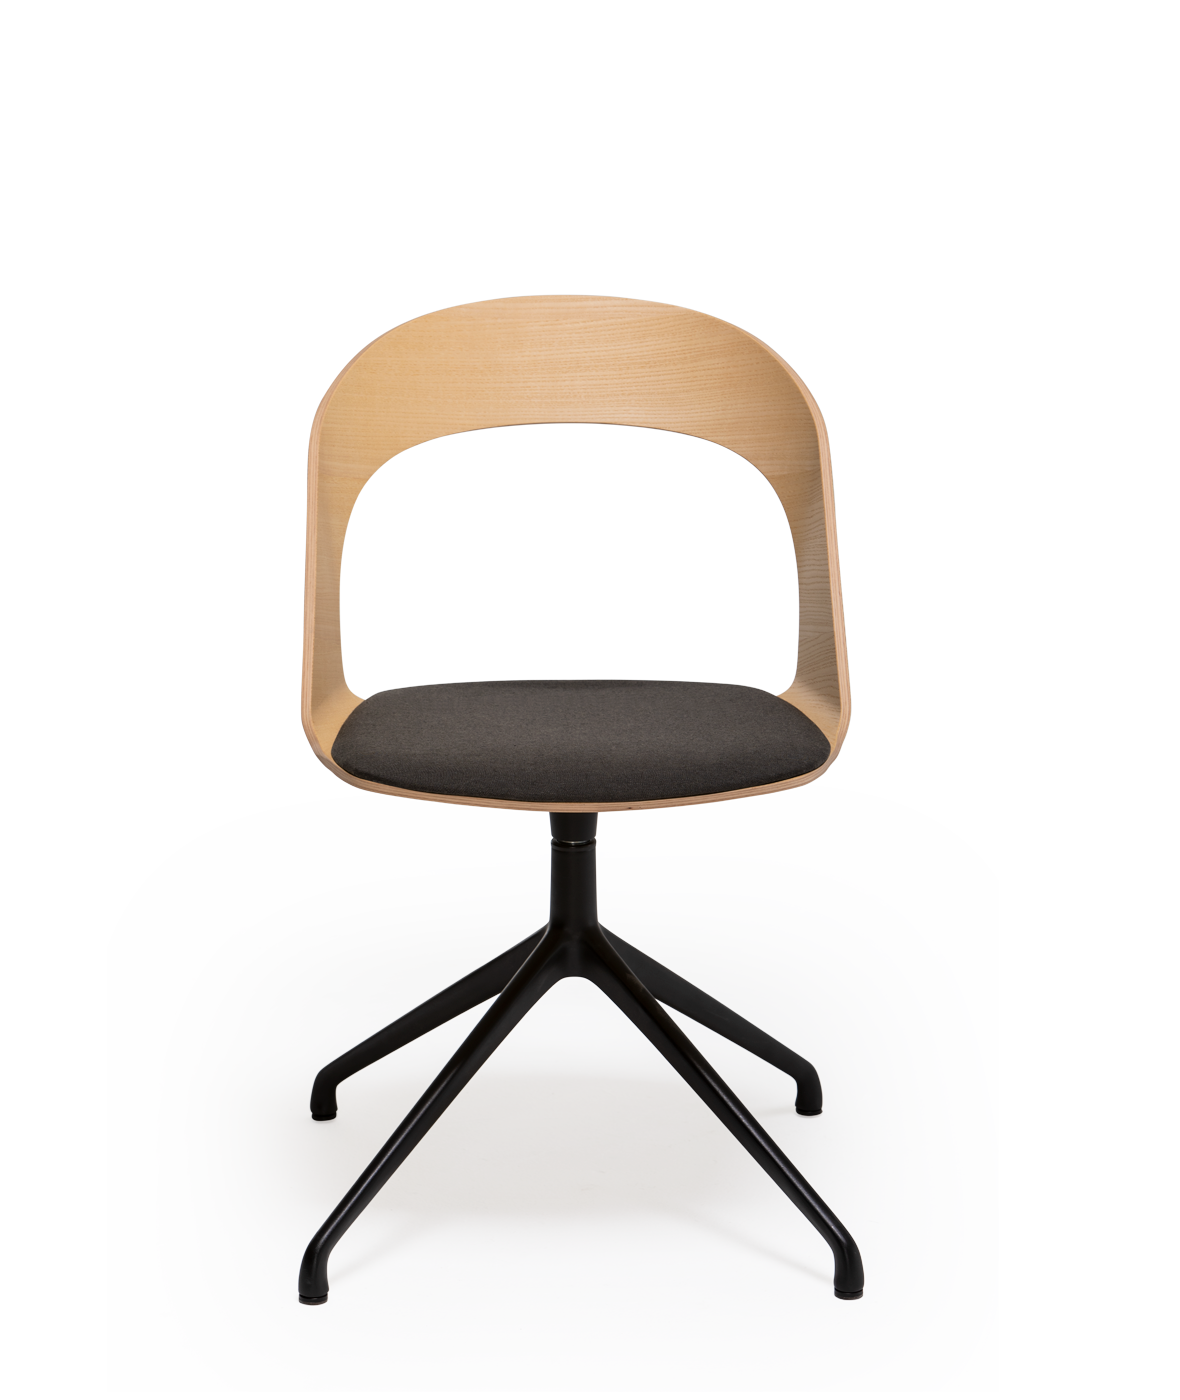 Vergés - Goose chair Model D with 4 rollers swivel base